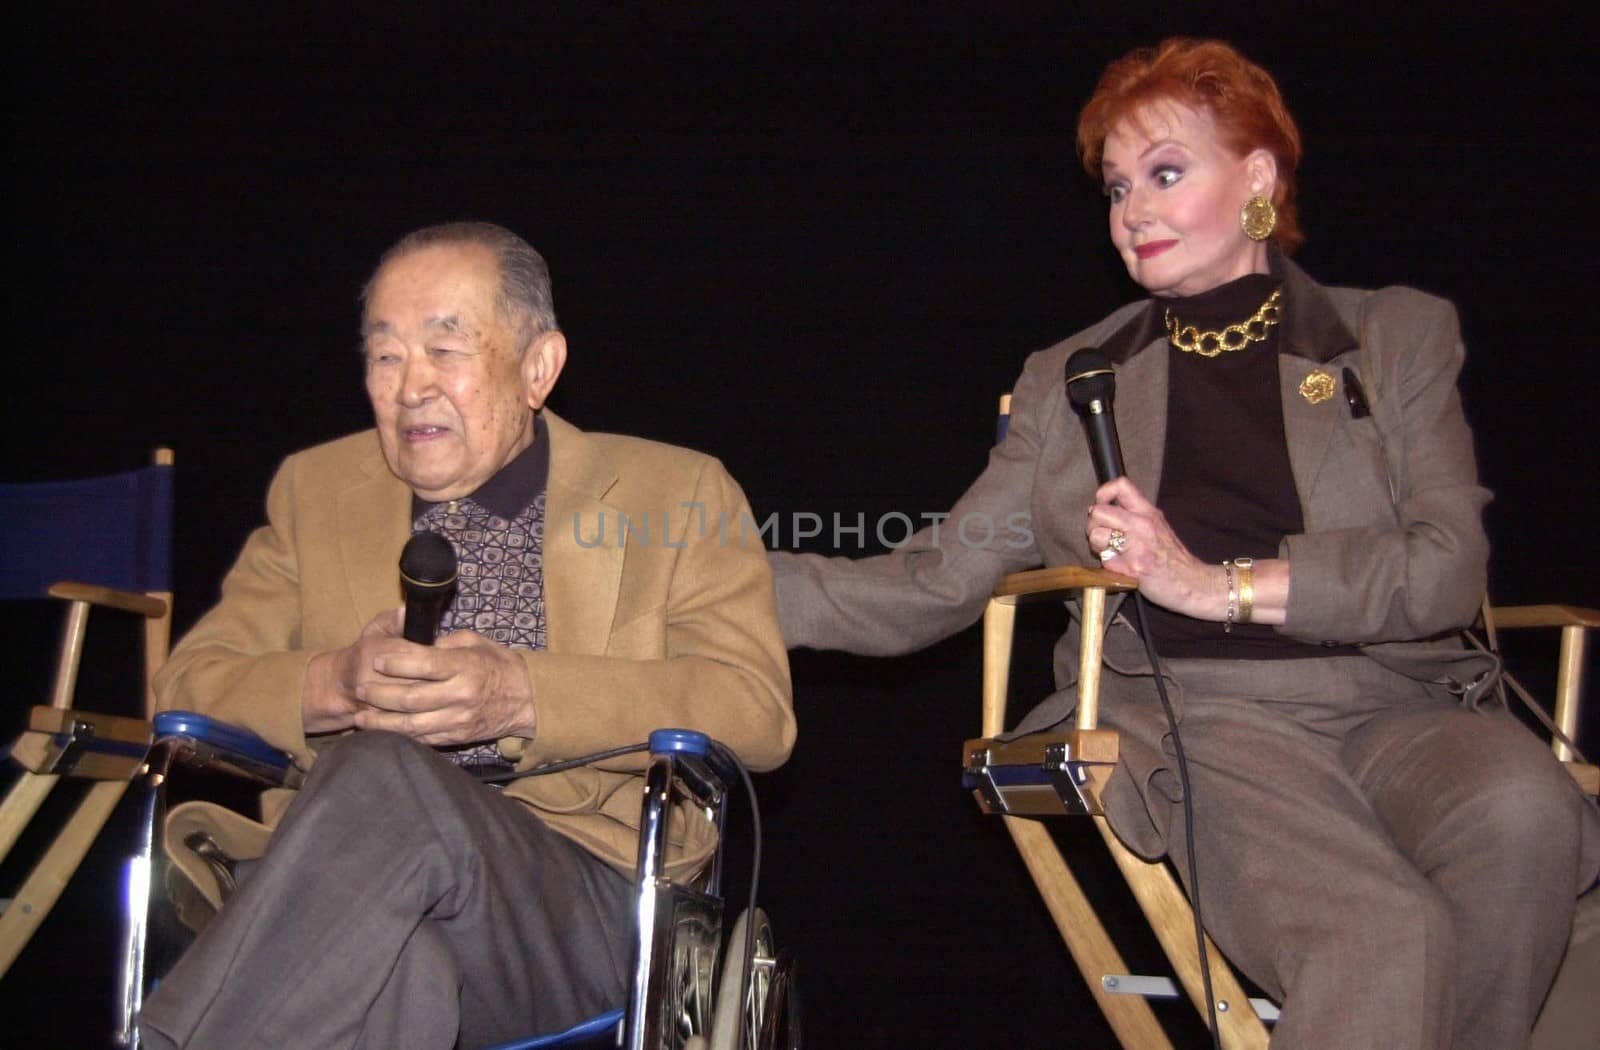 Robert Cornthwaite and Ann Robinson at the American Cinematheque's screening of "War of the Worlds" in Hollywood, 02-12-00